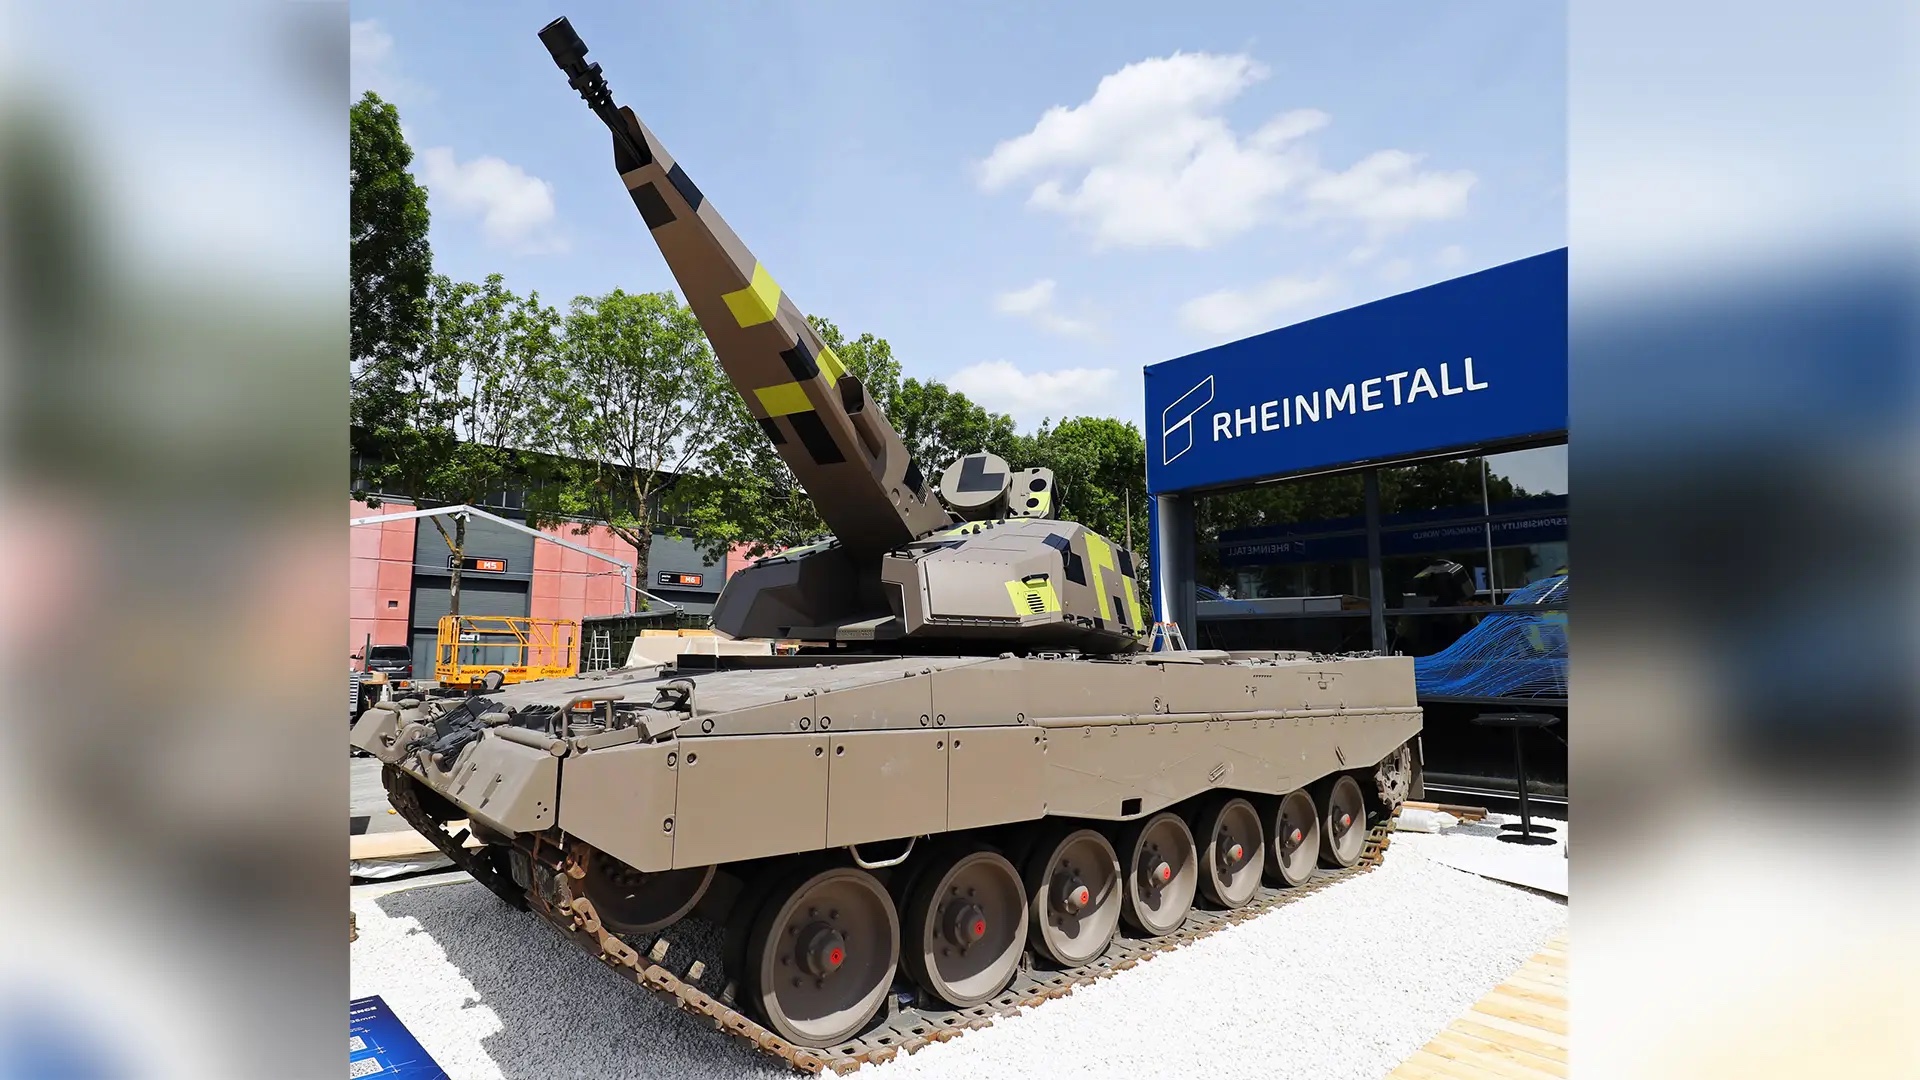 The German Rheinmetall company is assessing whether Cold War-era Leopard 1 tanks can have their turrets swapped out to be fitted with the Skyranger 35 short-range air defense system. The initiative is driven by Ukraine’s insatiable demand for ground-based air defenses, but it’s indicative of a broader resurgence in interest in short-range air defense systems (SHORADS), especially as the drone threat continue to proliferate around the globe.